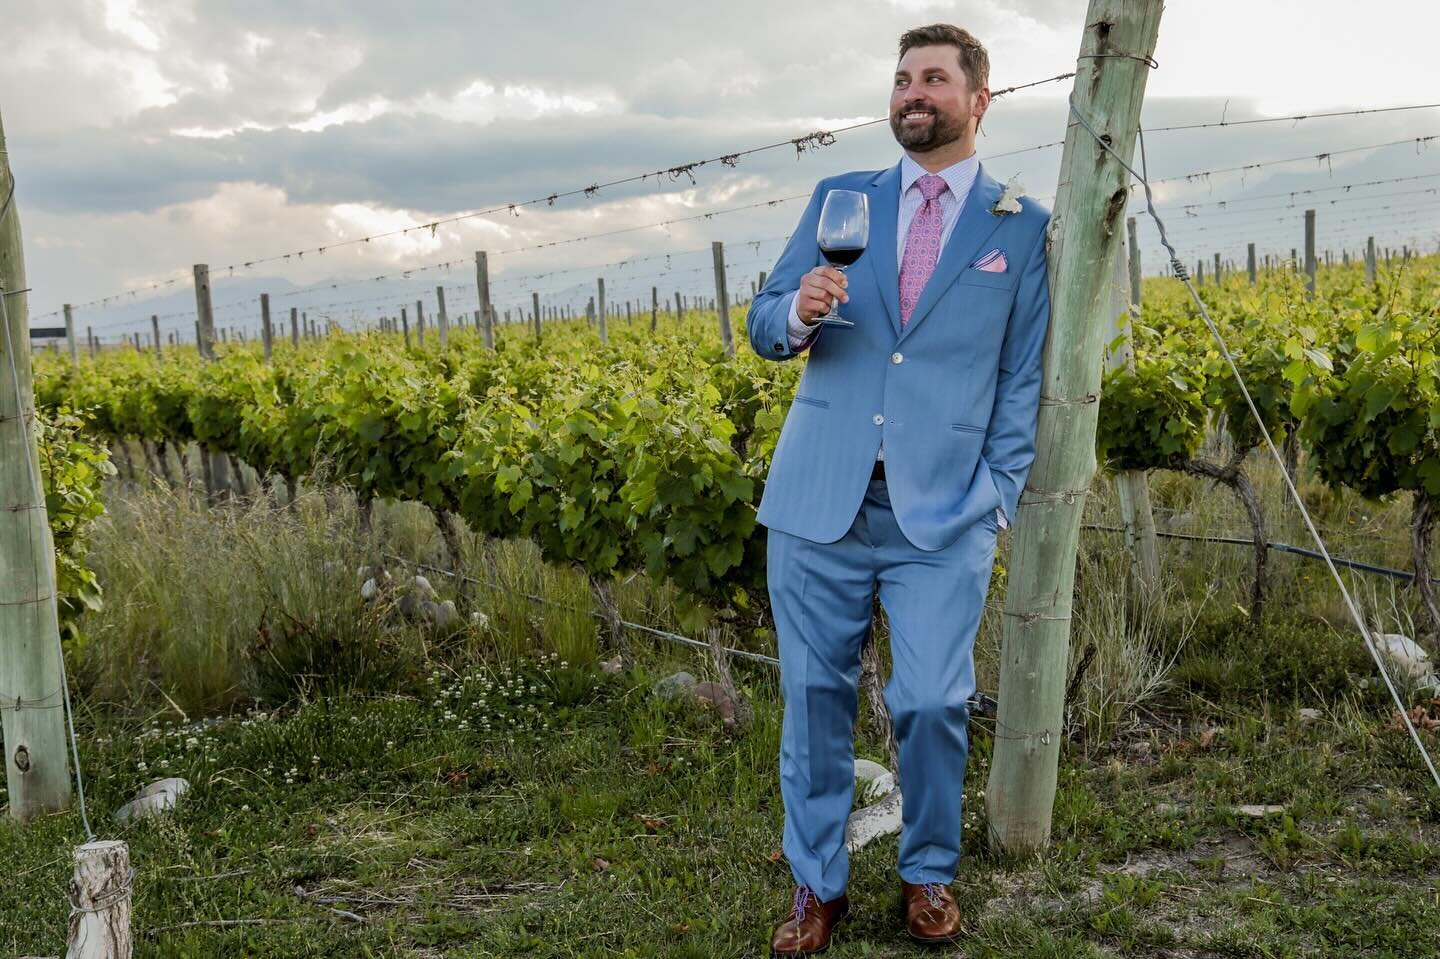 Mr. Picarillo renewed his vows in Argentina this winter, donning his very best suit, drinking the very best wine, and reminding his very beautiful wife just how much he loves her. 

So what did the lucky man wear for the big day?

Here&rsquo;s the an